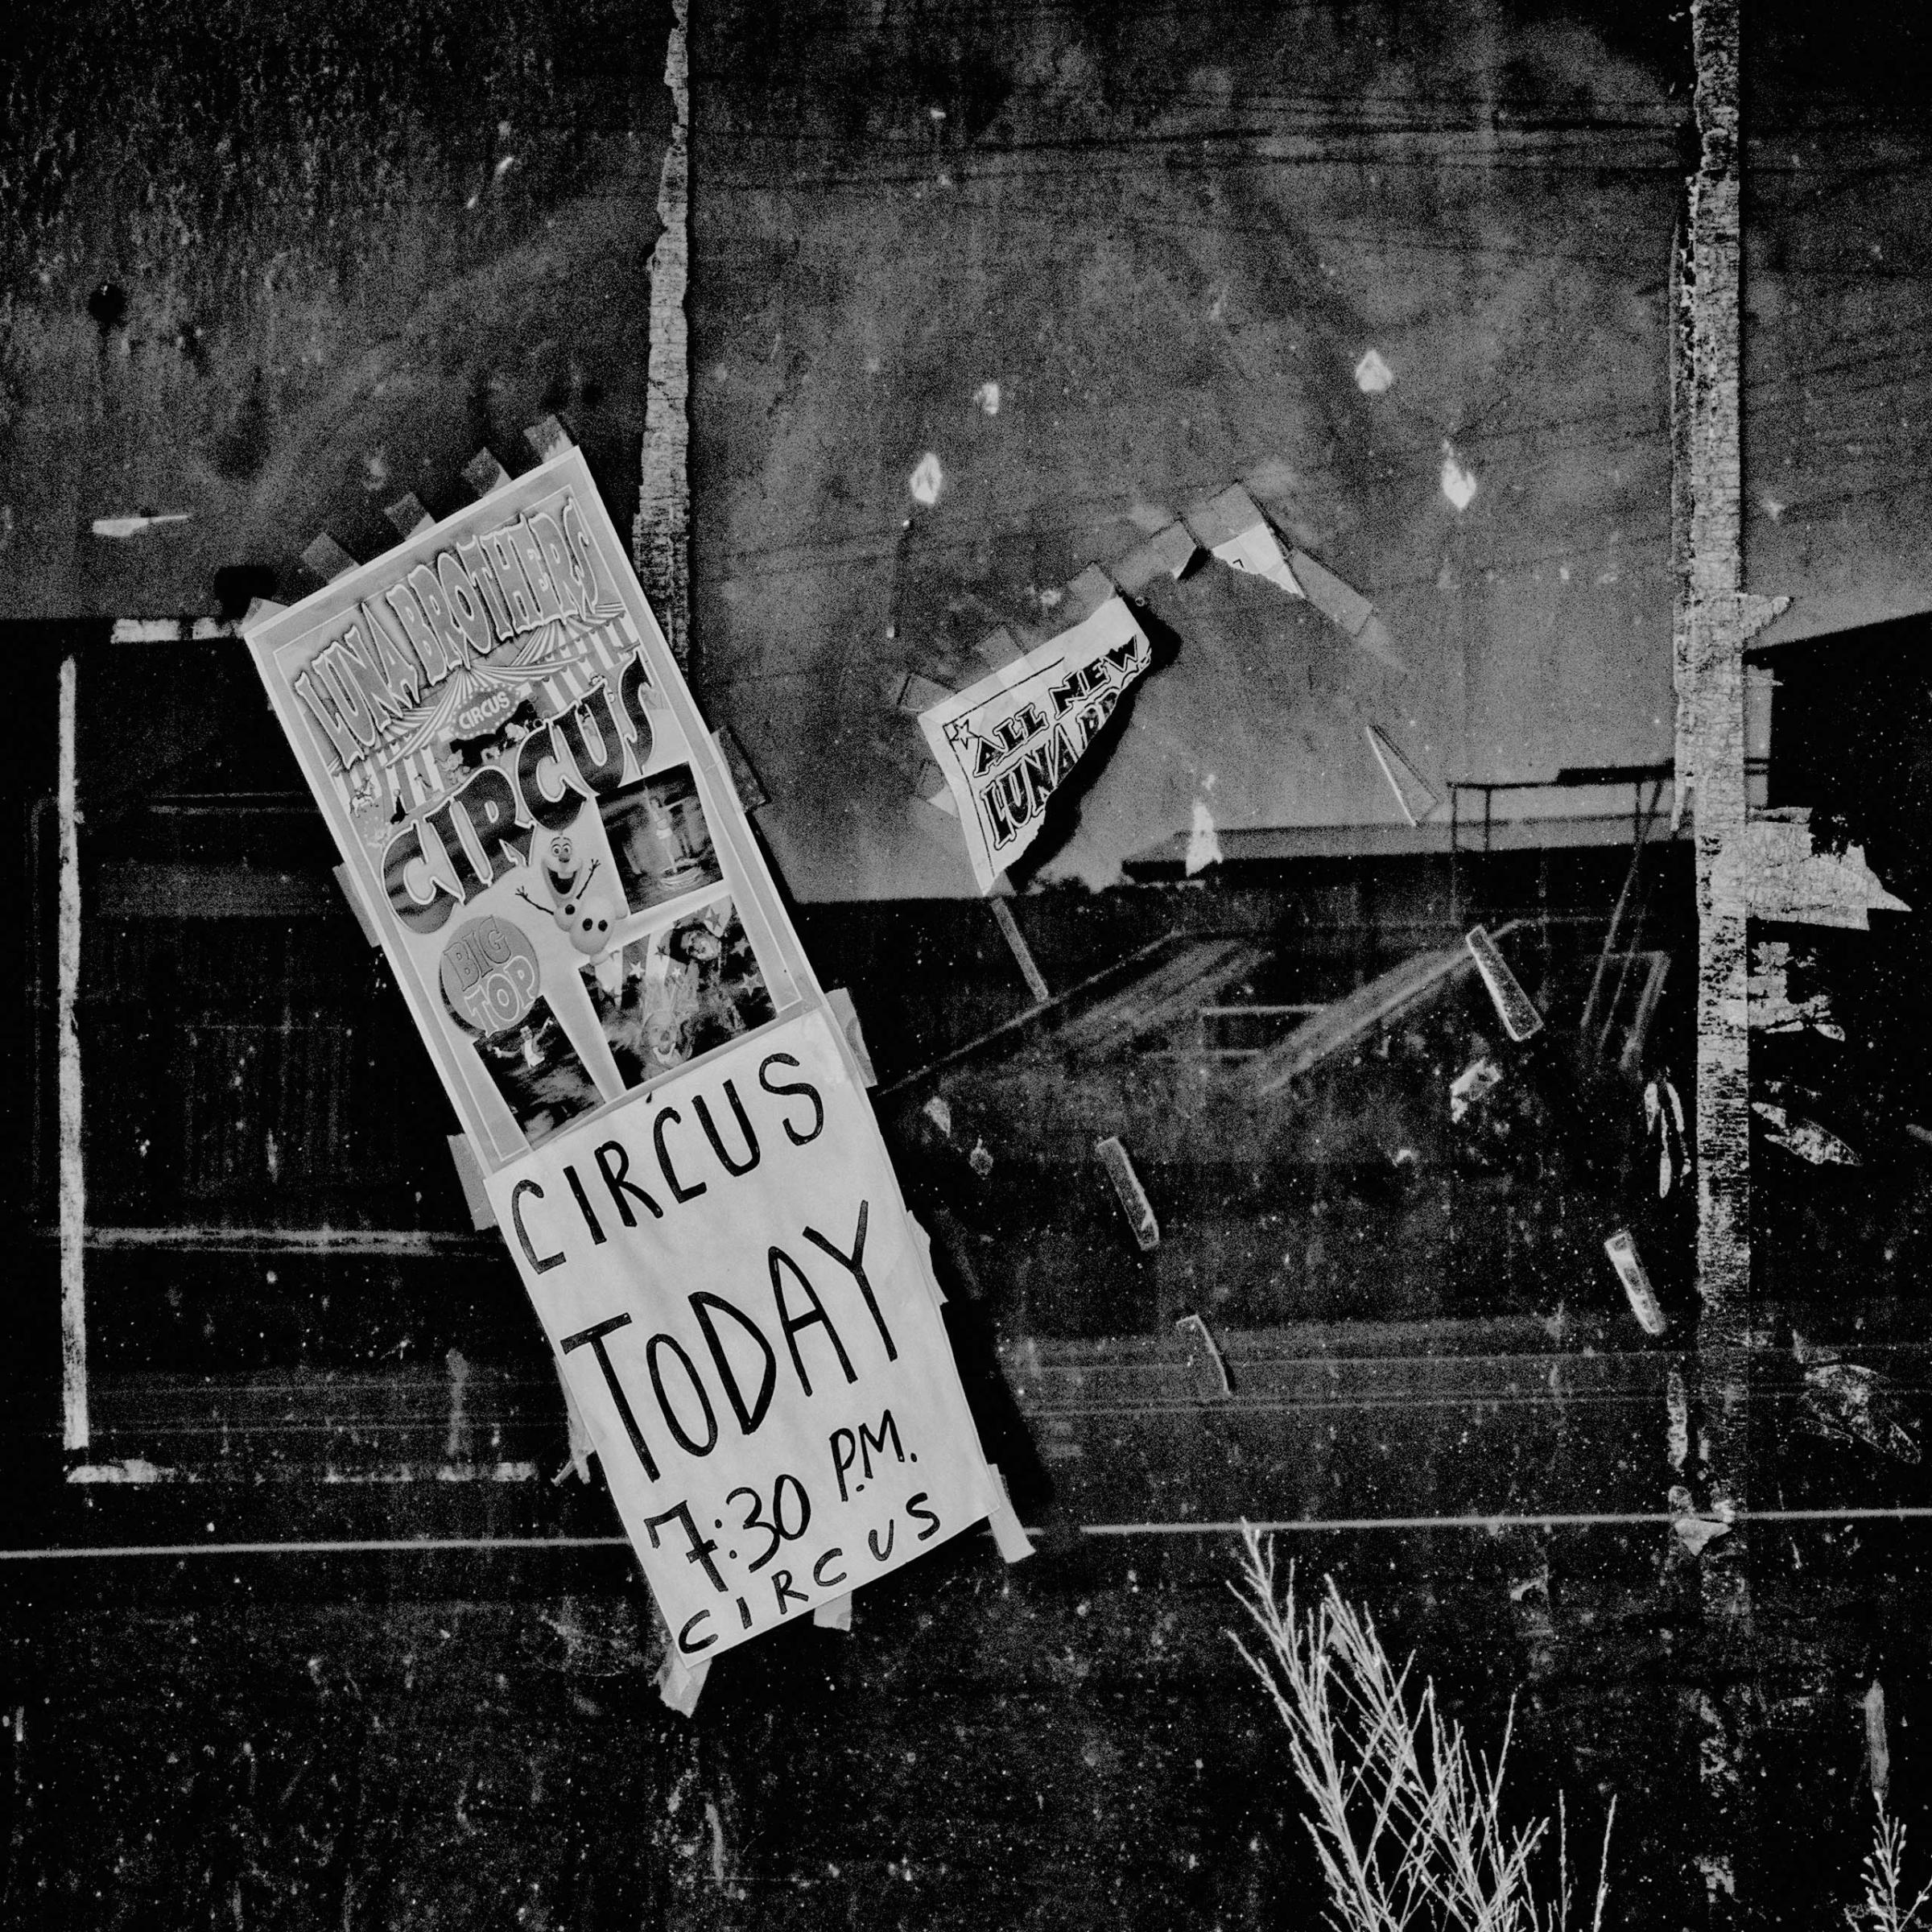 The Geography of Poverty USA - Starr County, TX. Circus sign. Starr County’s population is 60,968 and 39.2% live below the poverty level. #geographyofpoverty